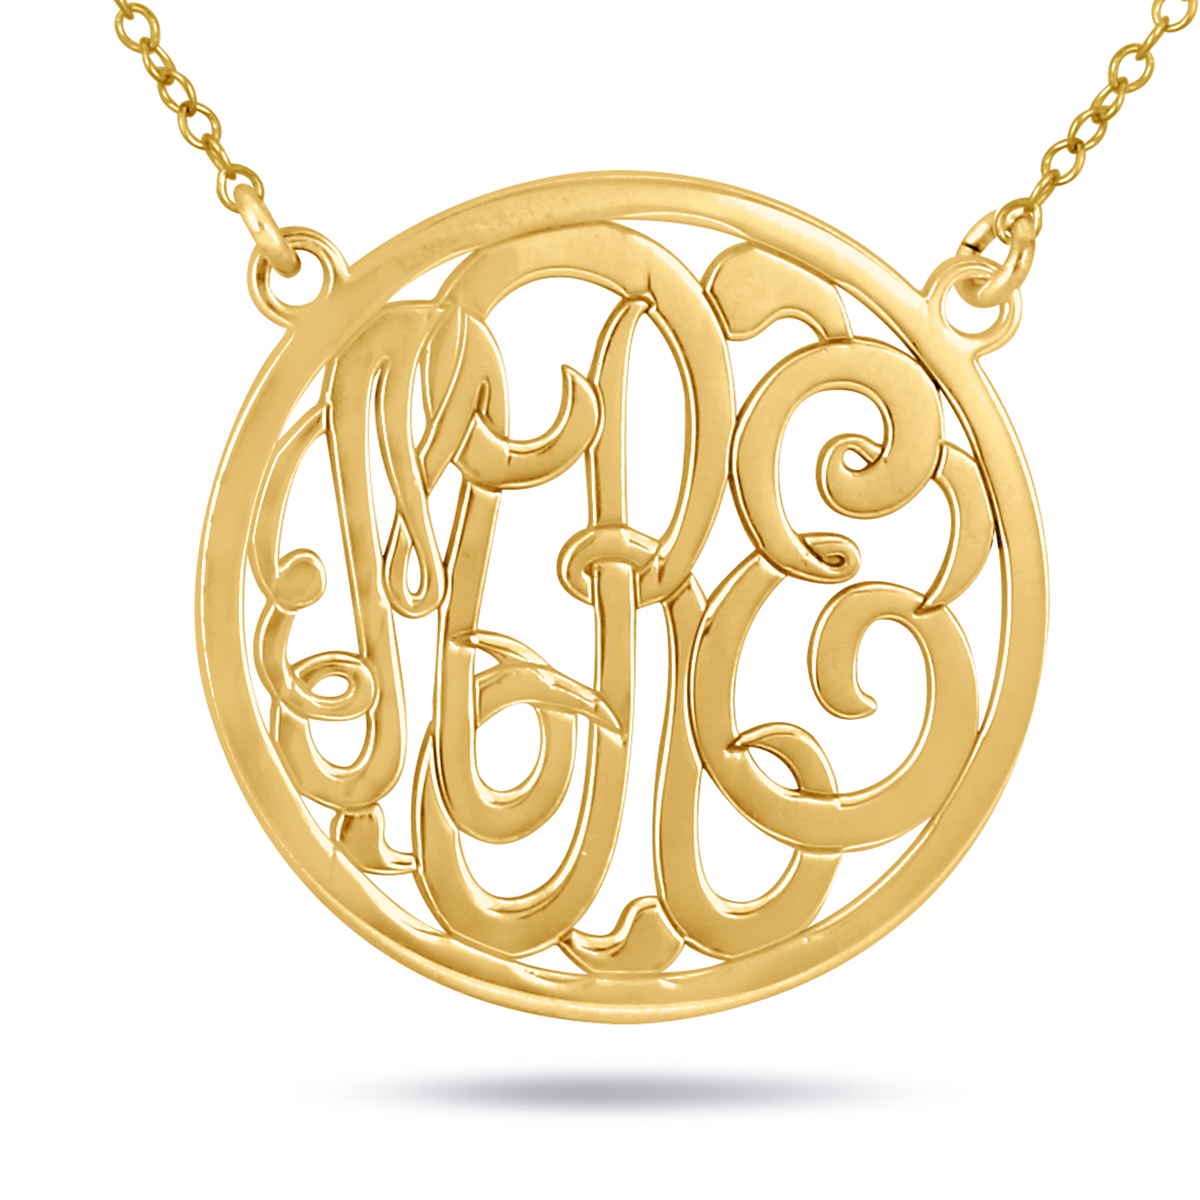 Monogram Initial Pendant in 24K Gold Plated Sterling Silver